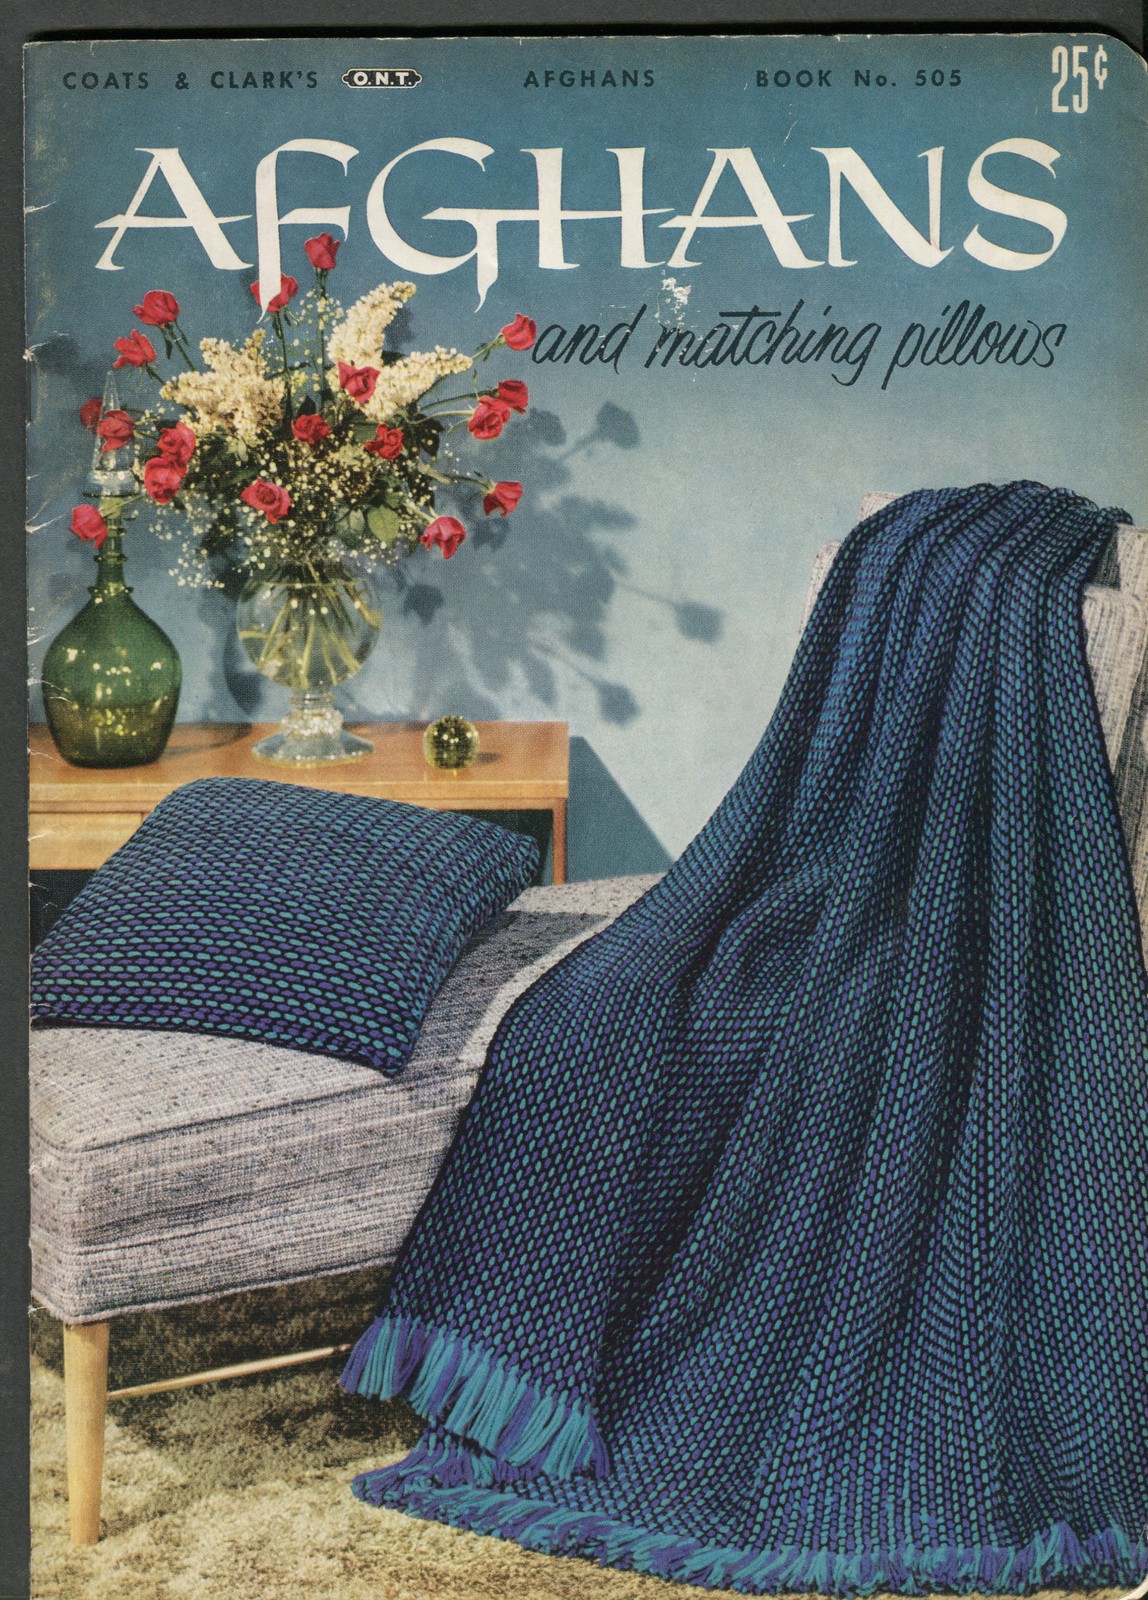 Primary image for 1954 Coats & Clark’s Afghans and matching pillows Book No 505